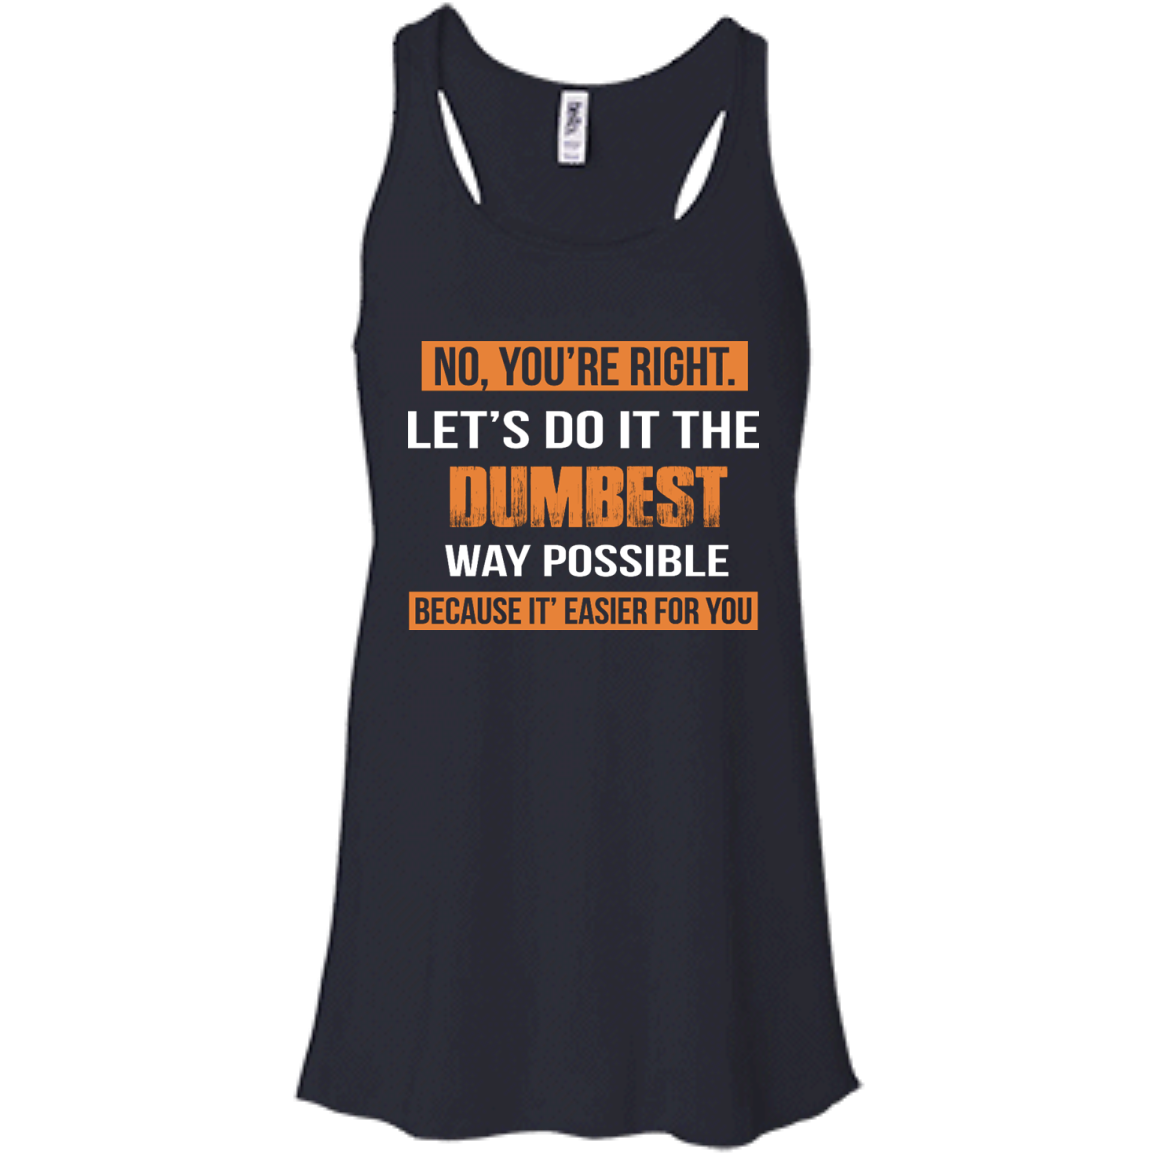 No You're Right Let's Do It The Dumbest Way Possible shirt, tank, hood ...